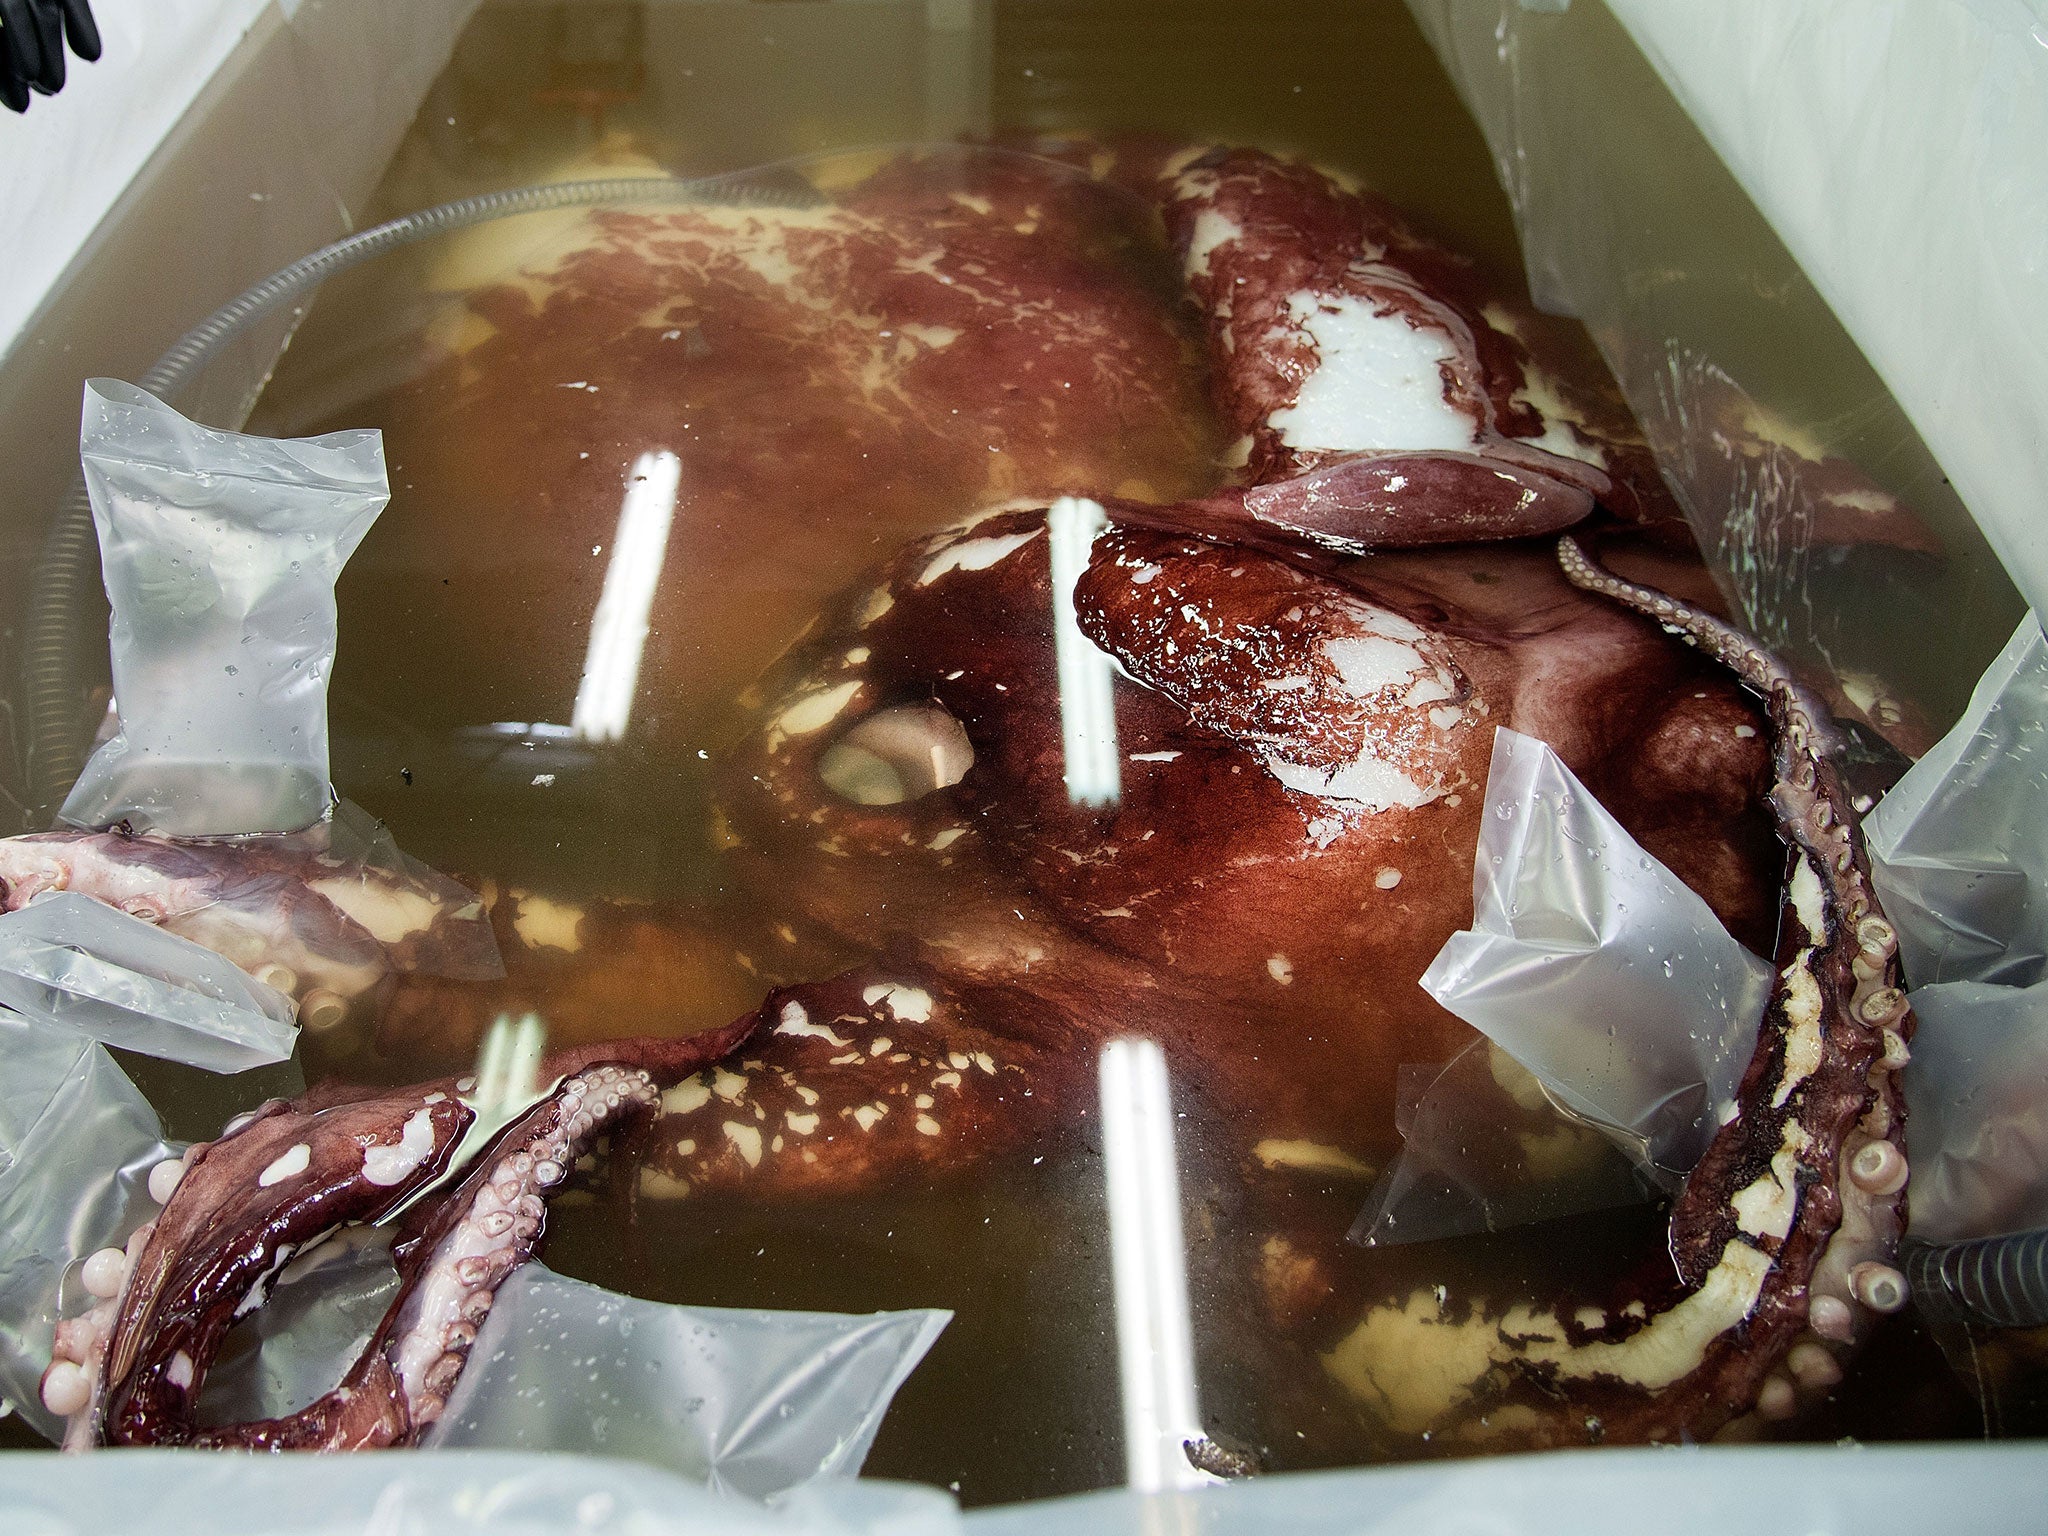 After waiting eight months, researchers were finally able to thaw out a 350kg squid in order to inspect the elsuive deep sea creature.